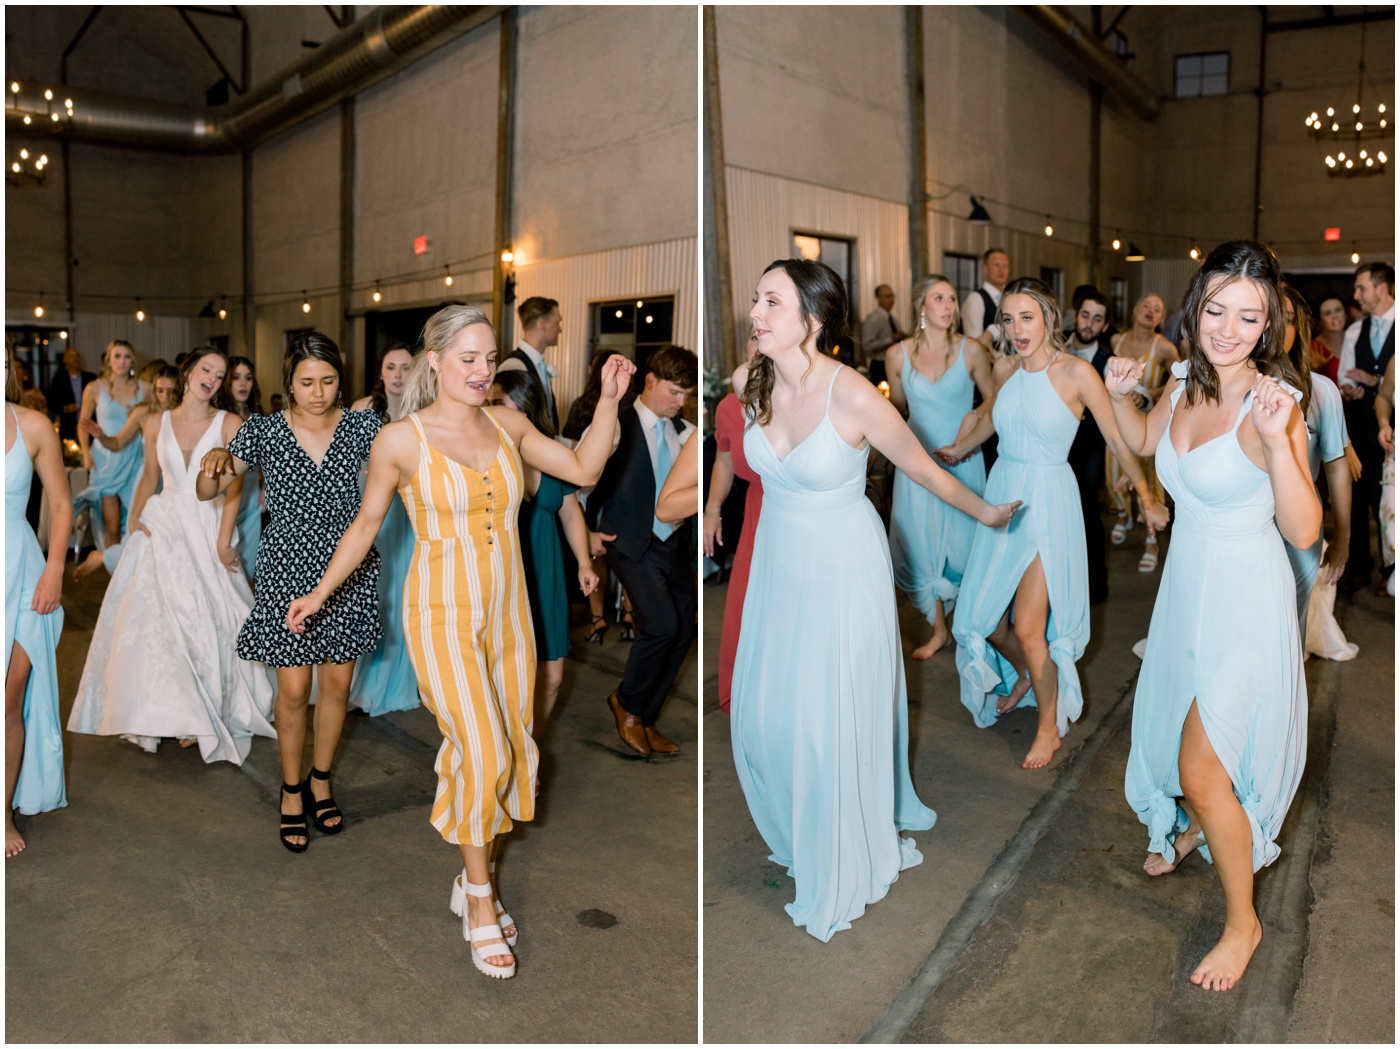 guests dance at the Texas wedding